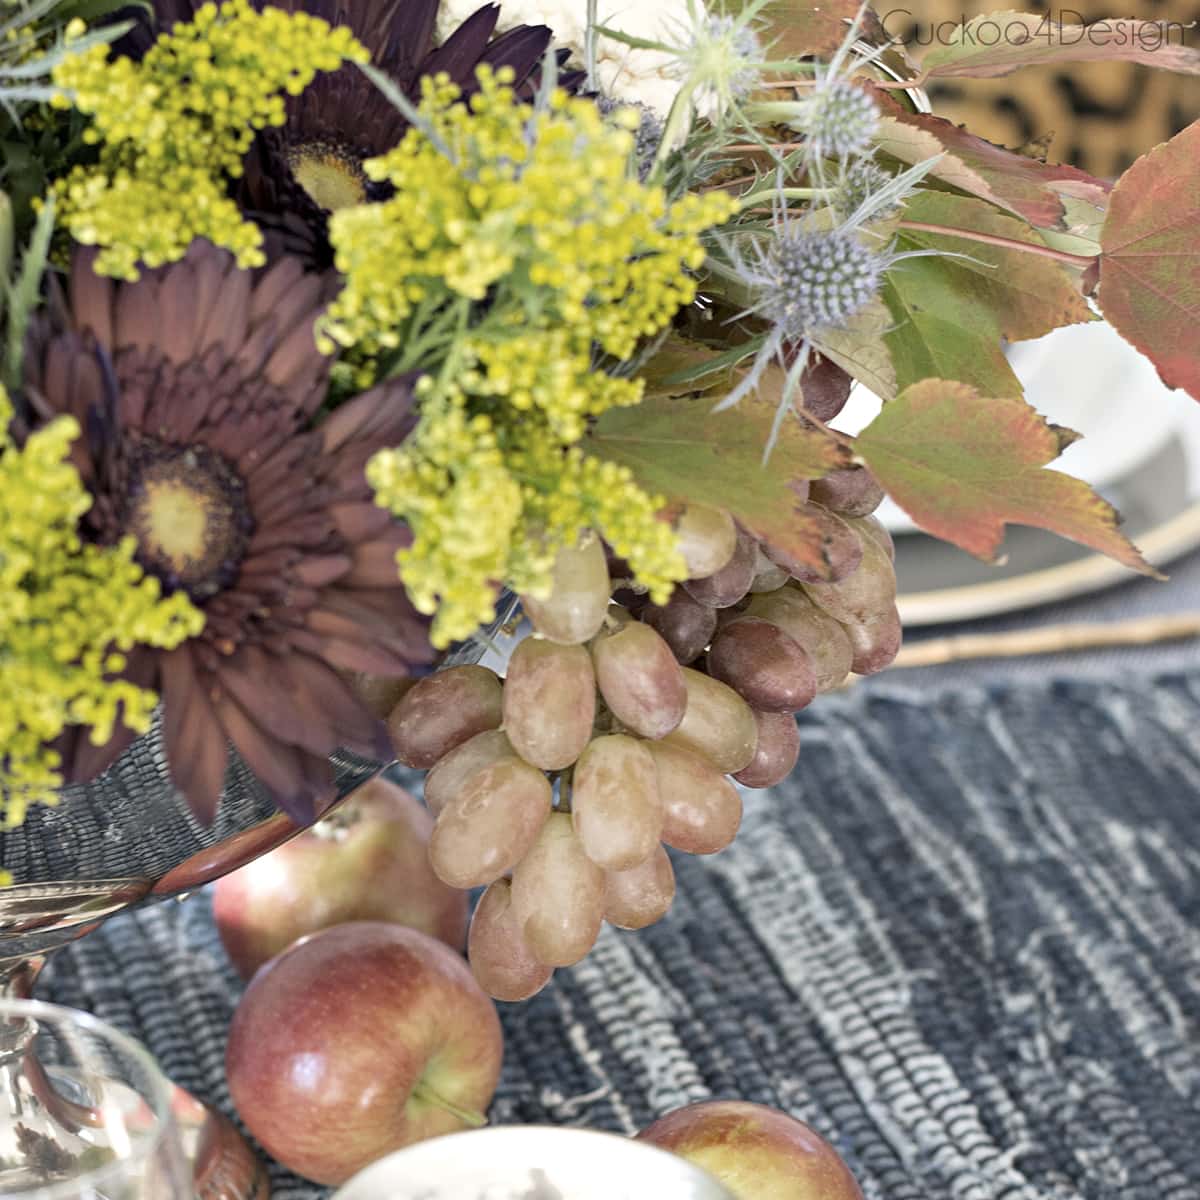 Blue Jeans Fall or Thanksgiving Tablescape